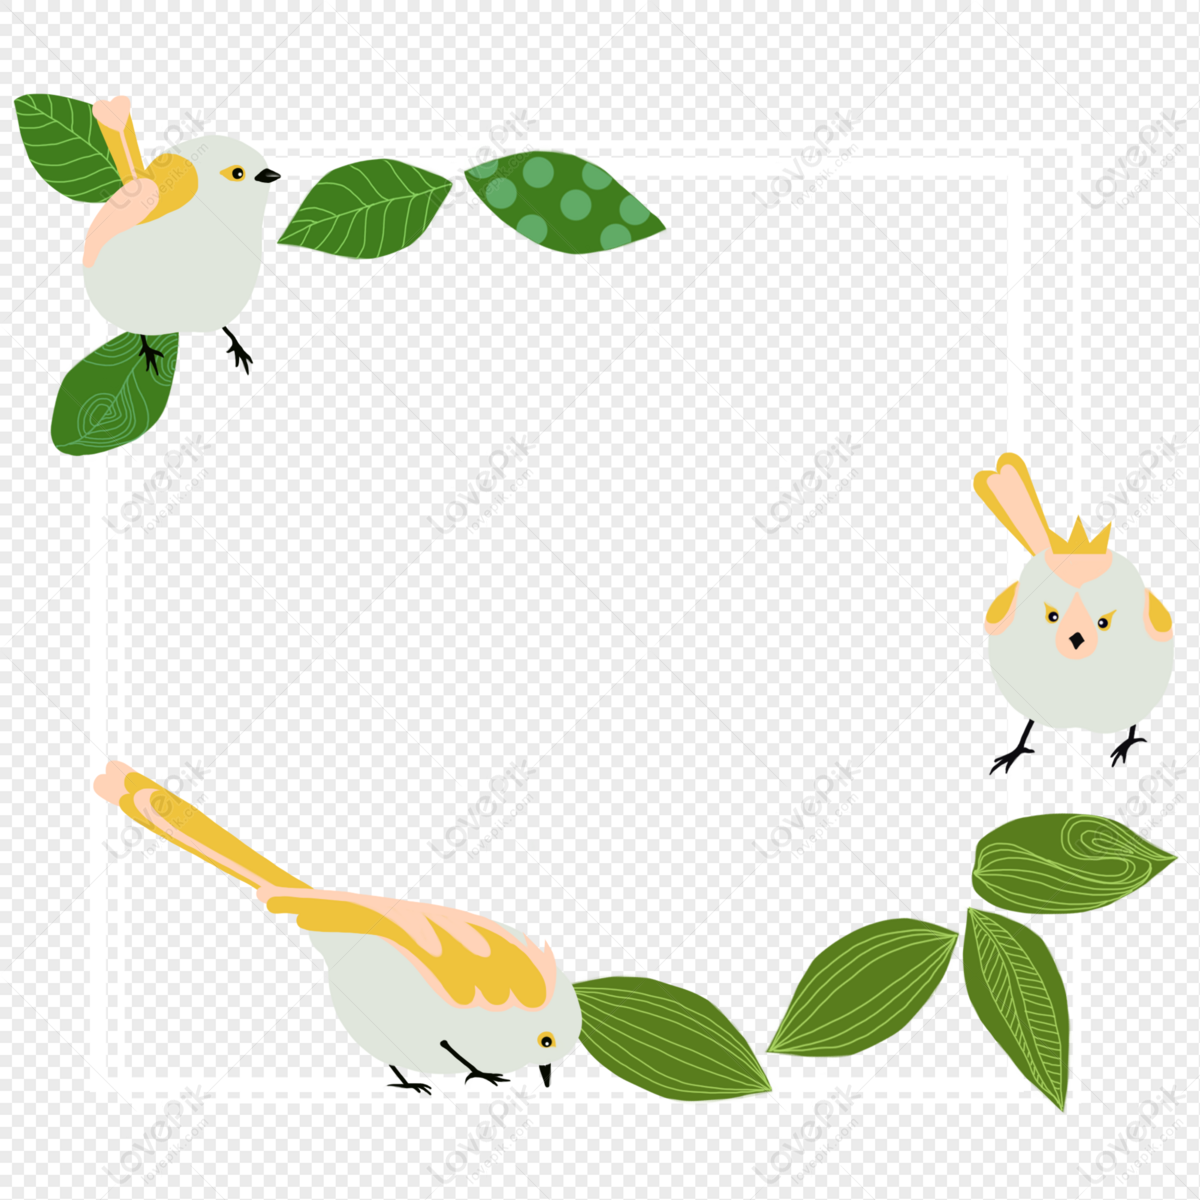 Simple Bird PNG Transparent Image And Clipart Image For Free Download ...